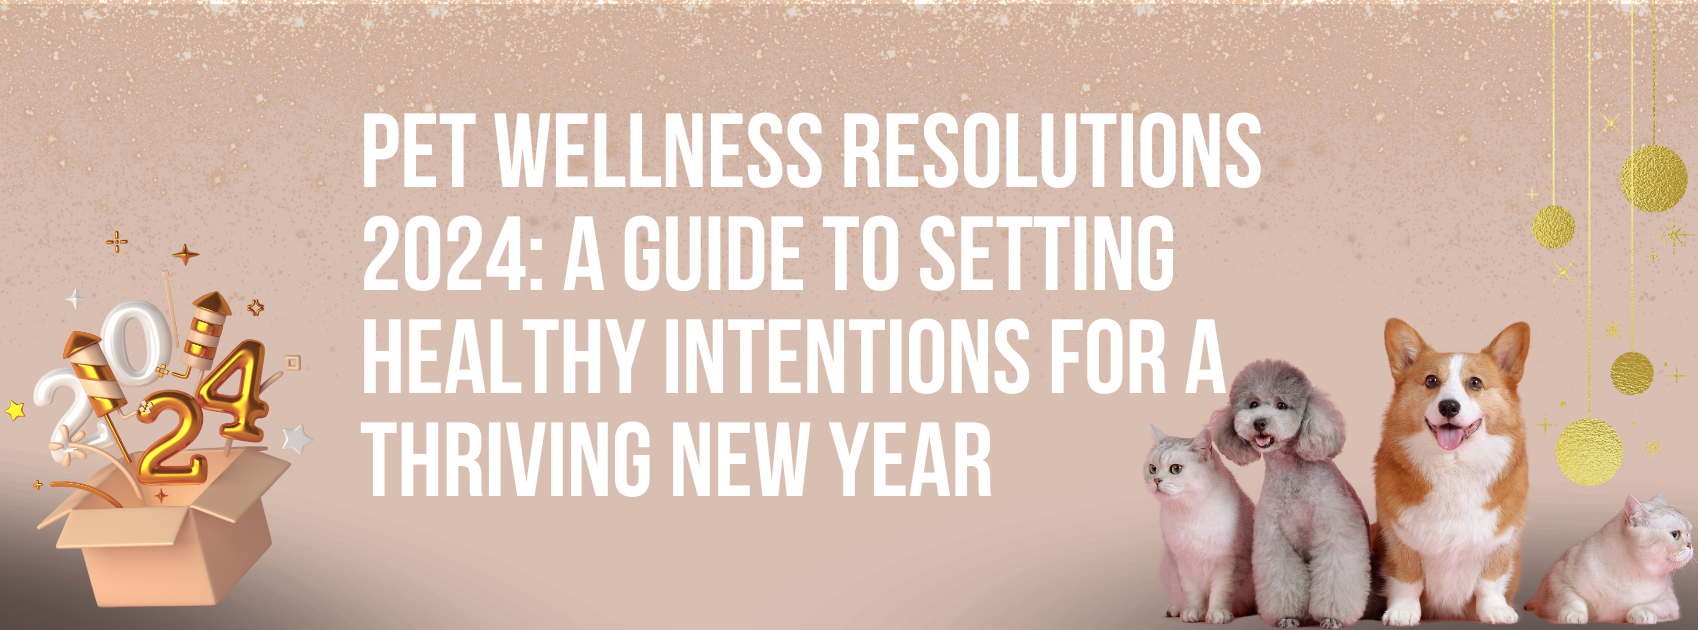 Pet Wellness Resolutions 2024: A Guide to Setting Healthy Intentions for a Thriving New Year